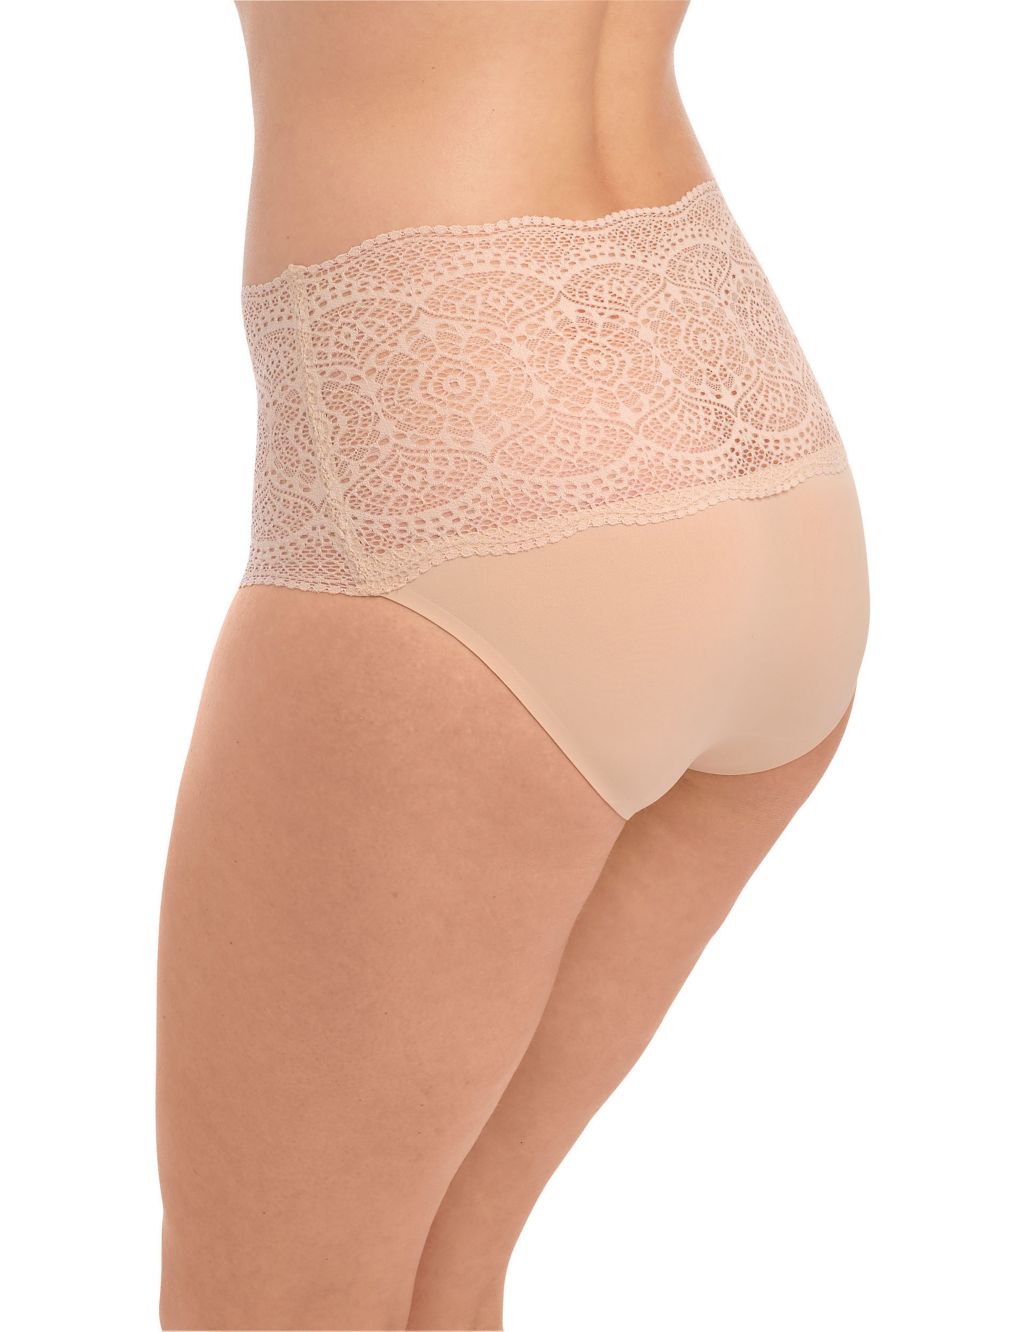 Lace Ease High Waisted Full Briefs image 4